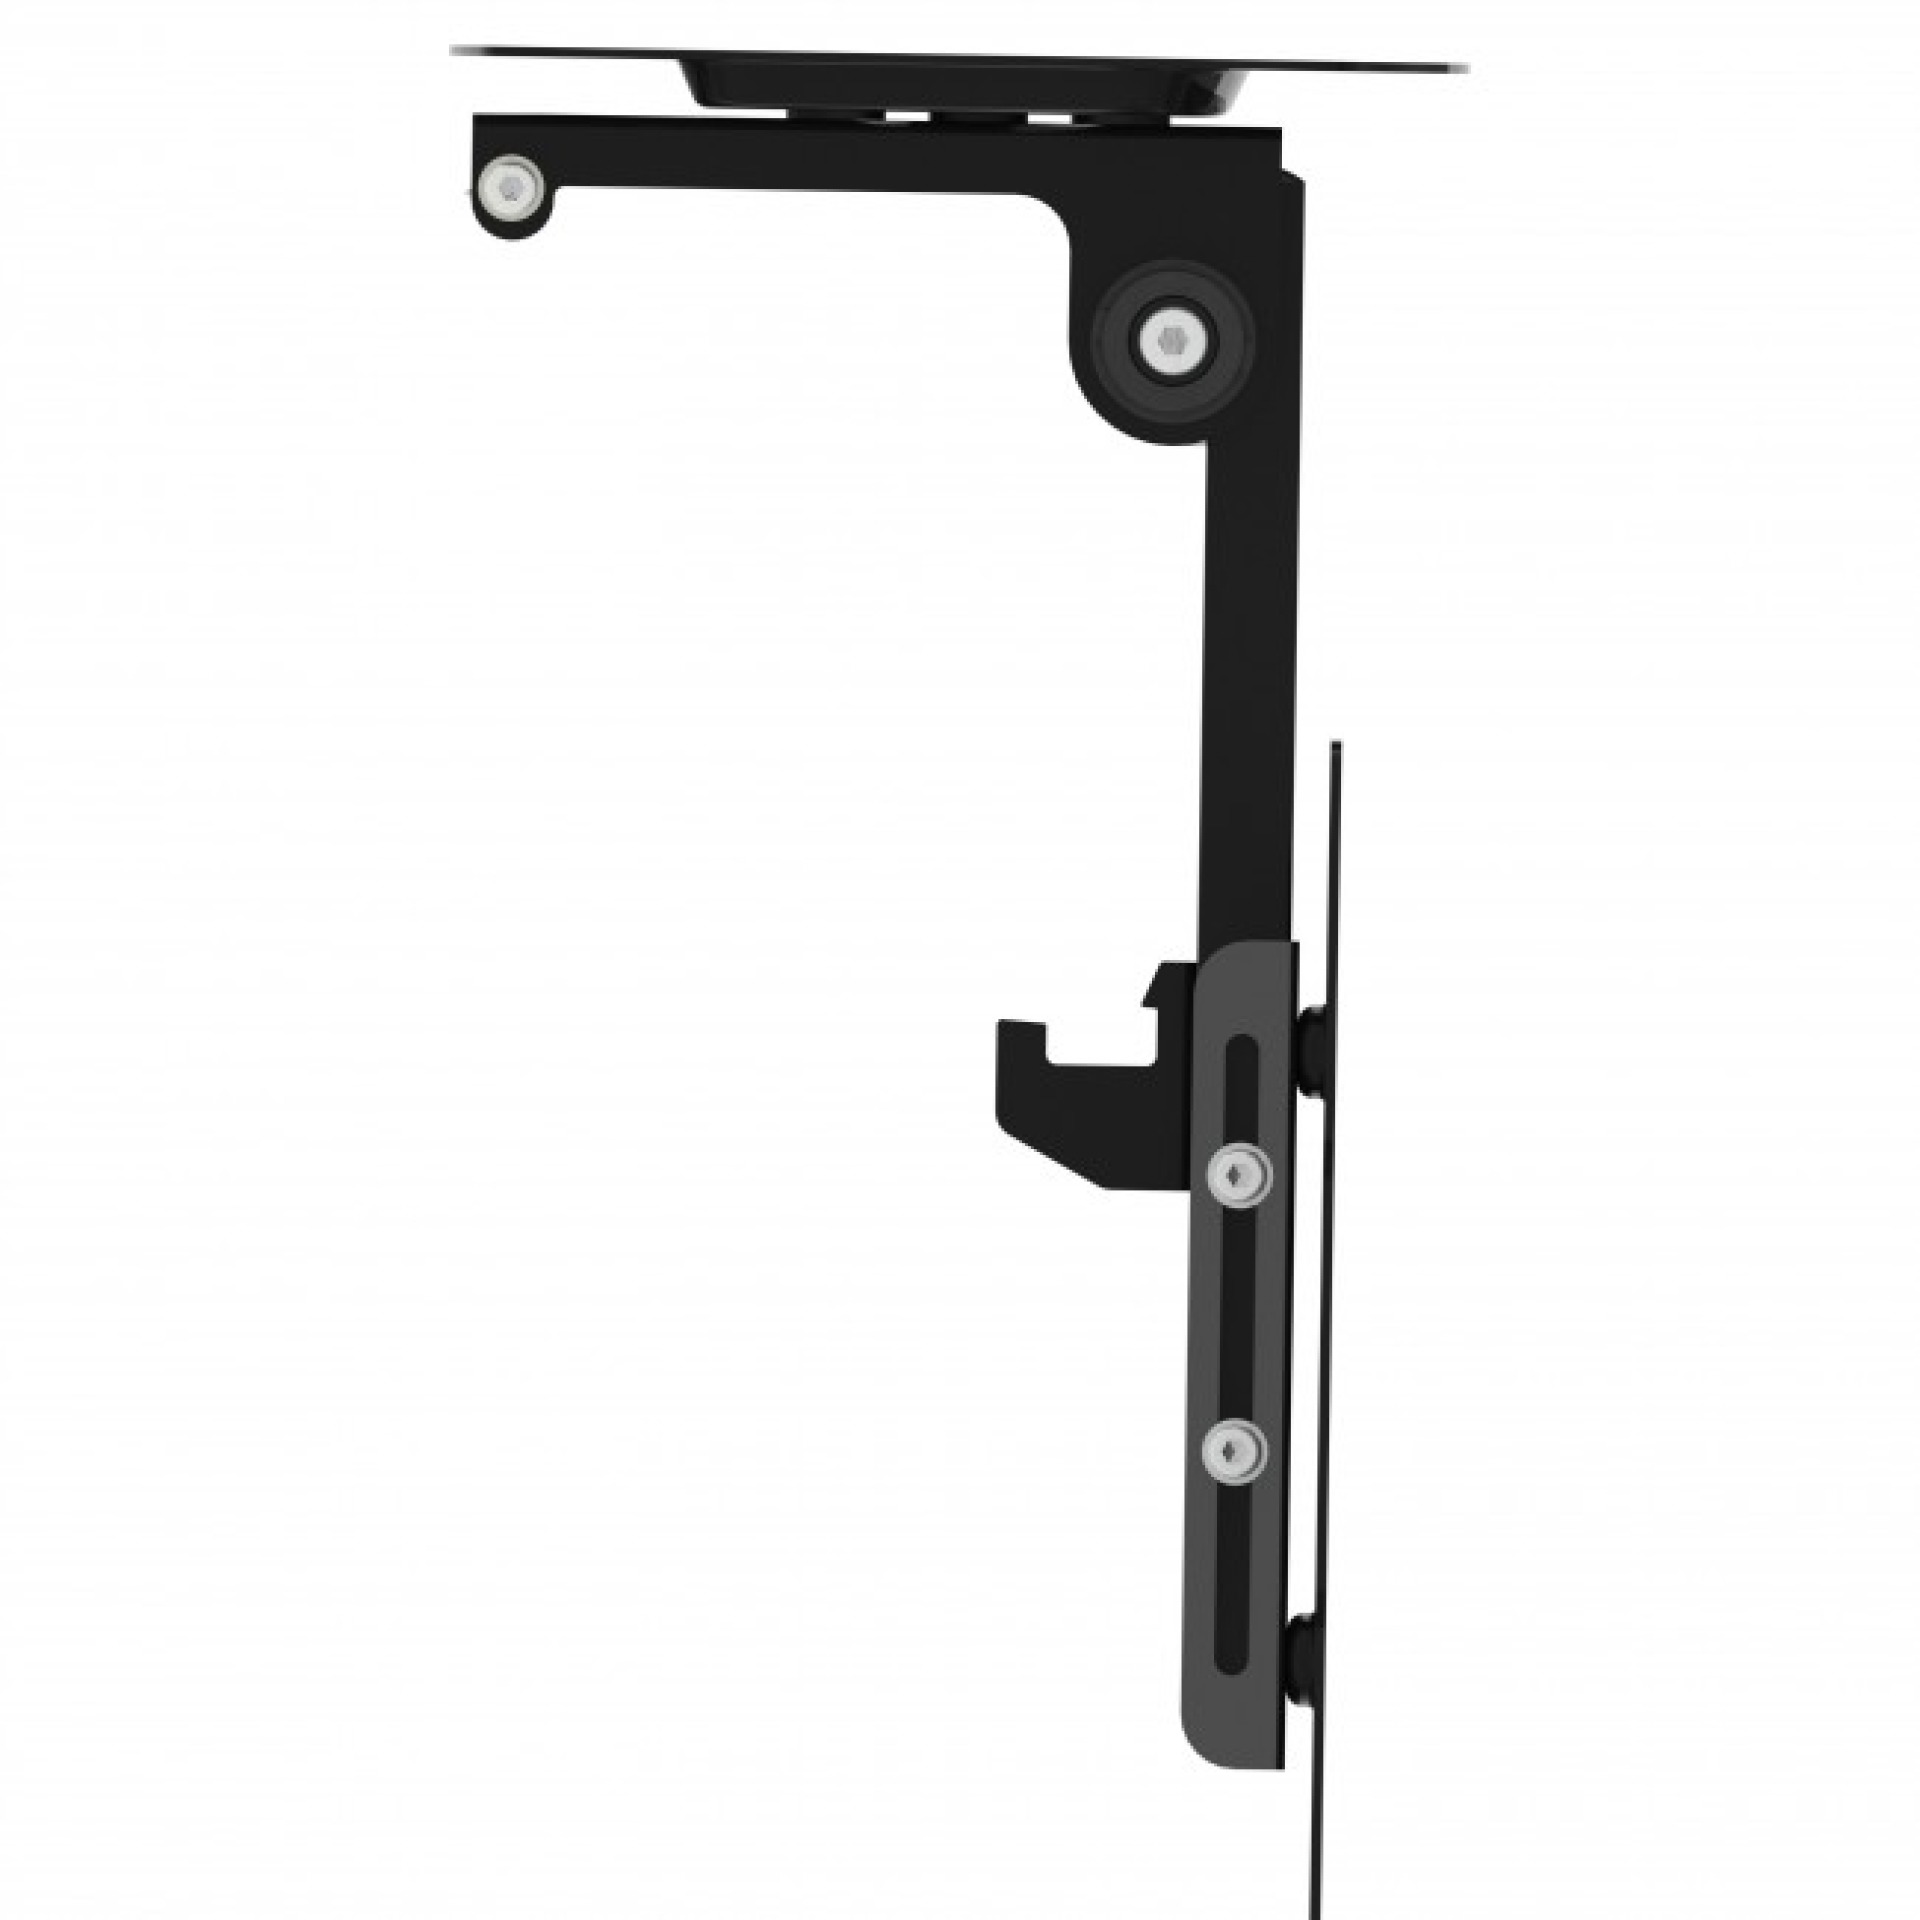 Fold-up TV Ceiling Mount for TV LED LCD 17-37"